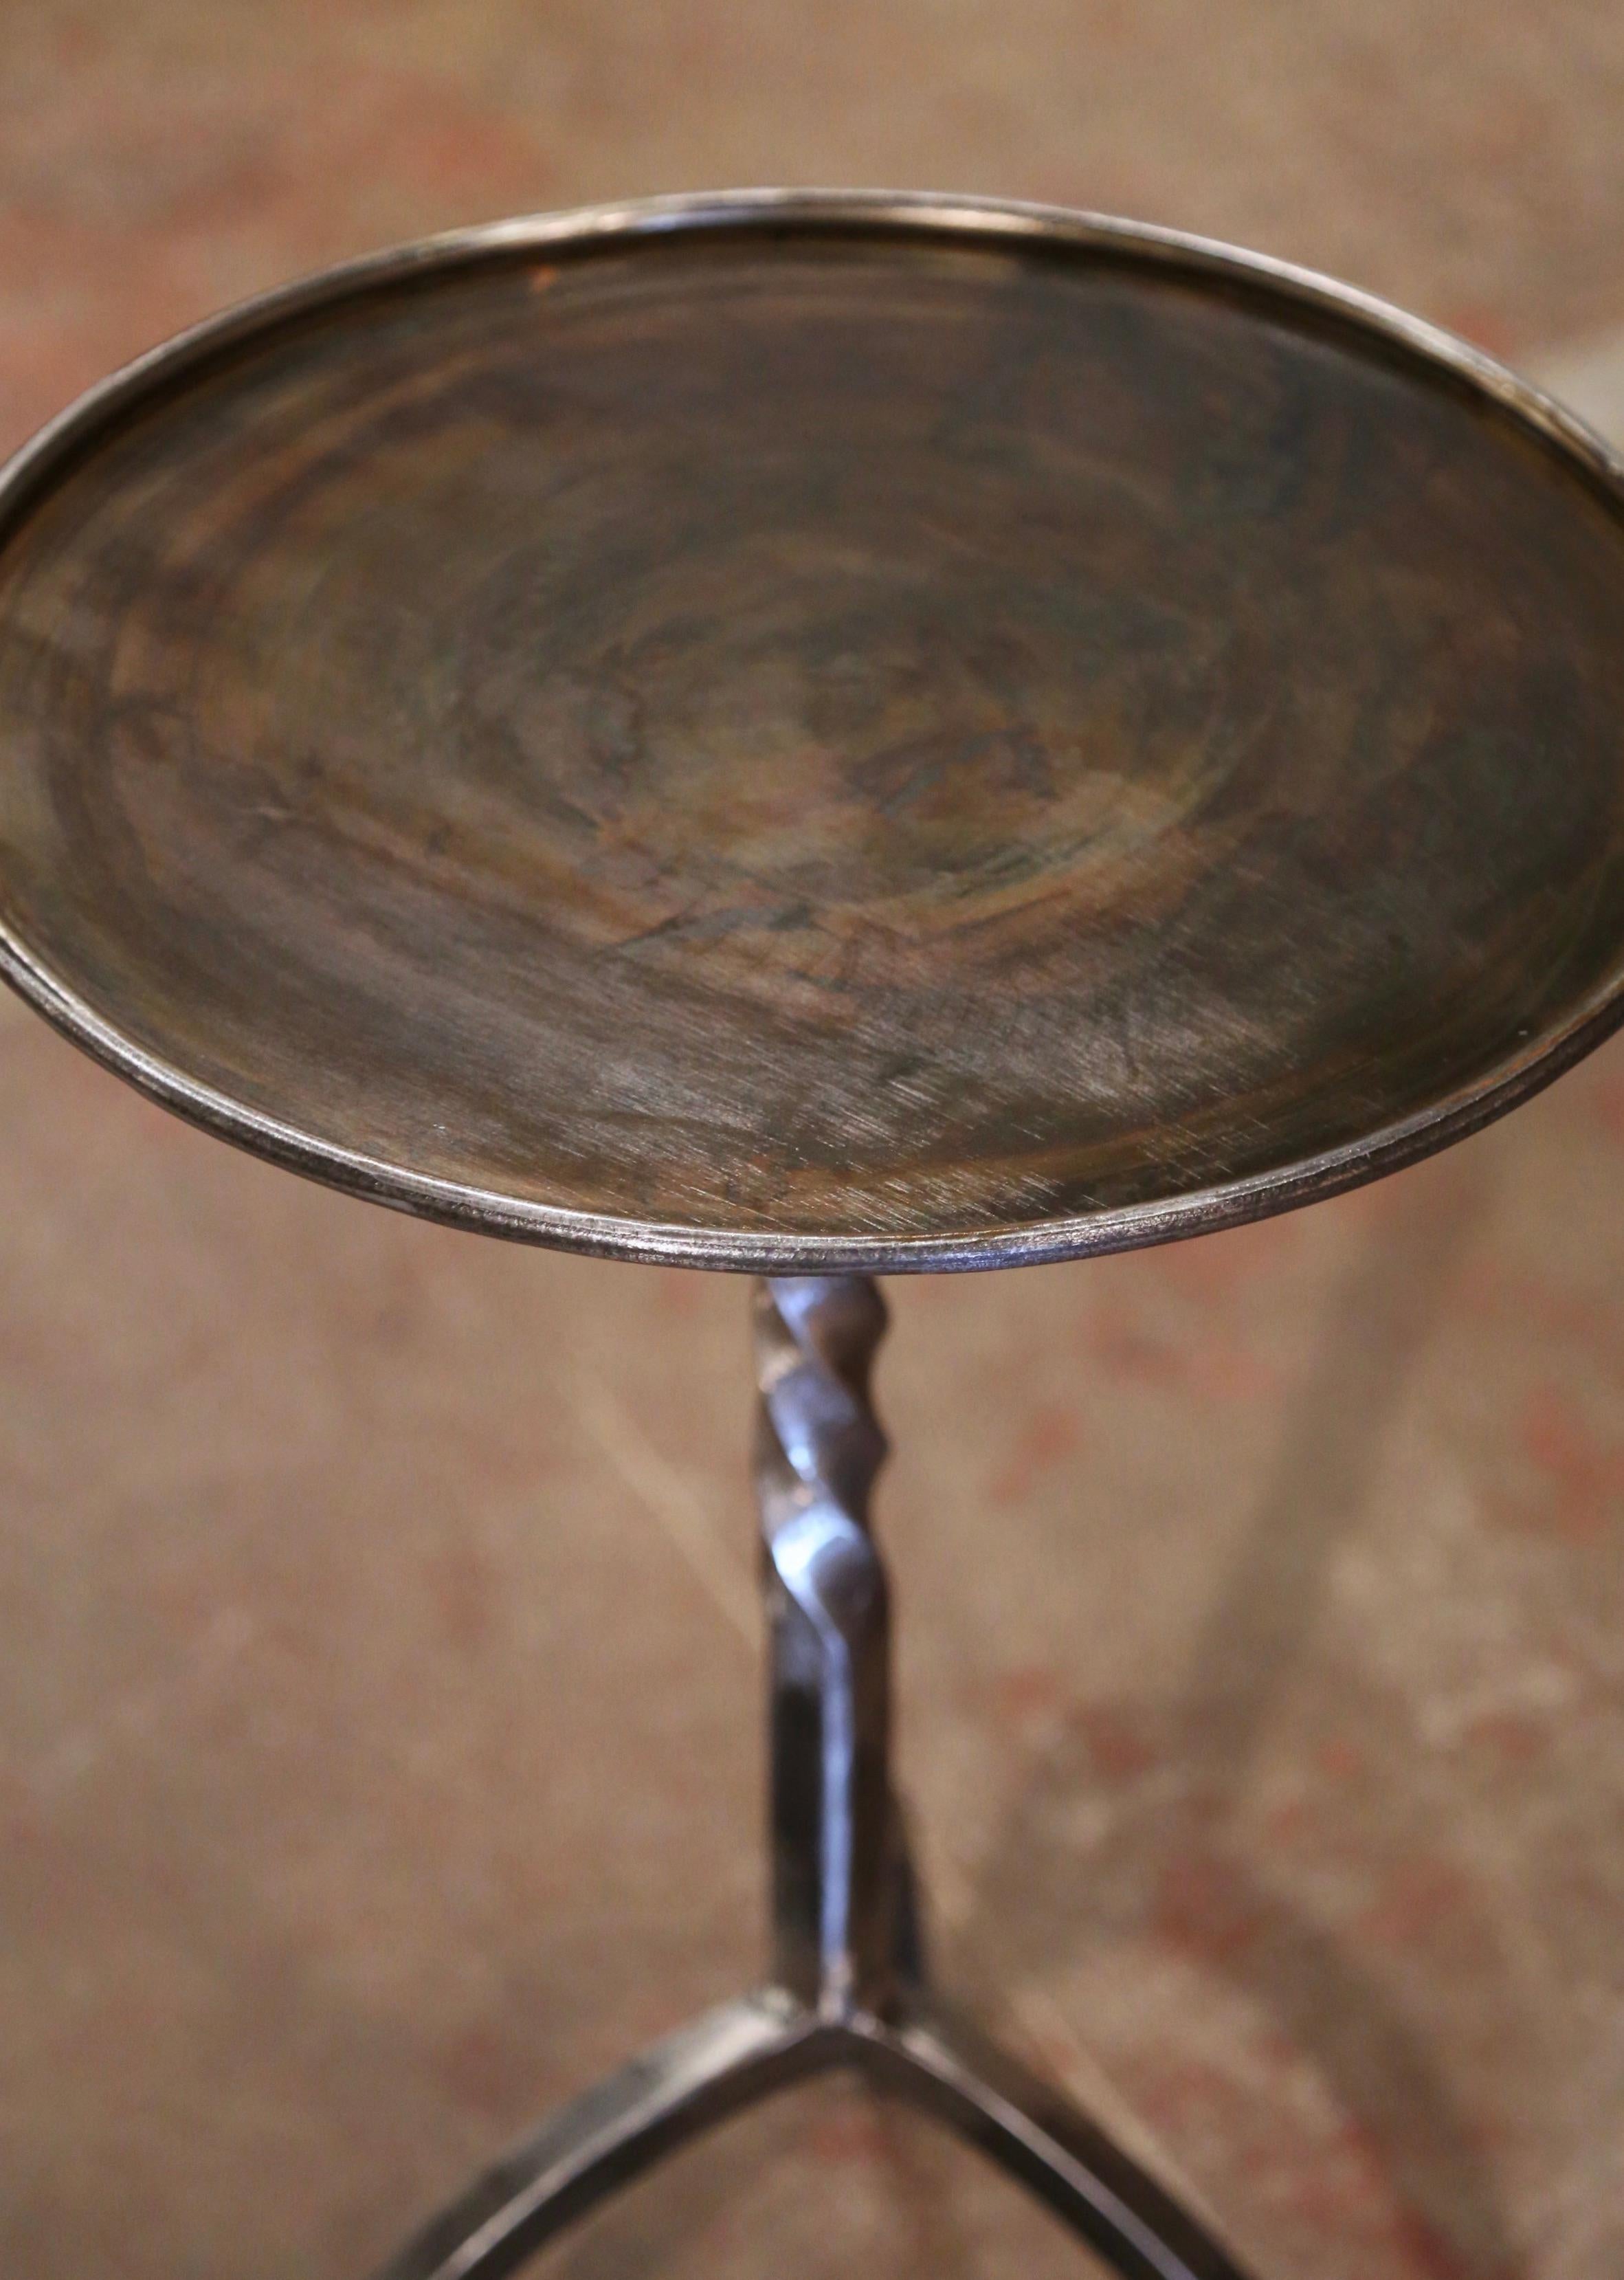 Forged French Style Polished Iron Pedestal Martini Side Table